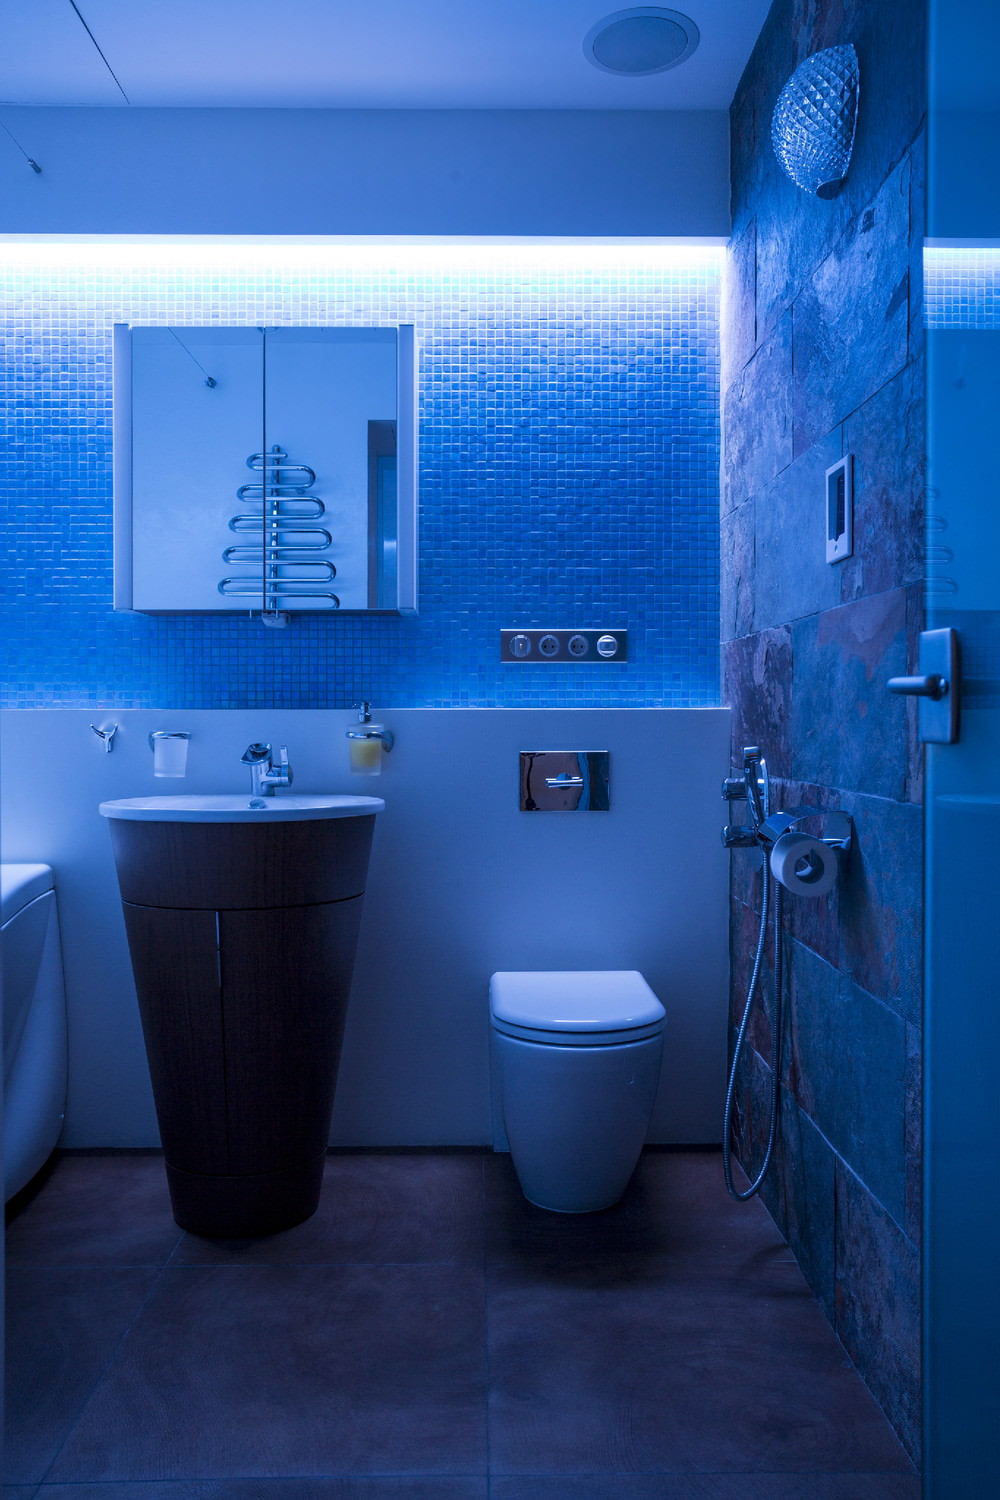 Bathroom in the design of a two-room apartment of 43 sq. m.